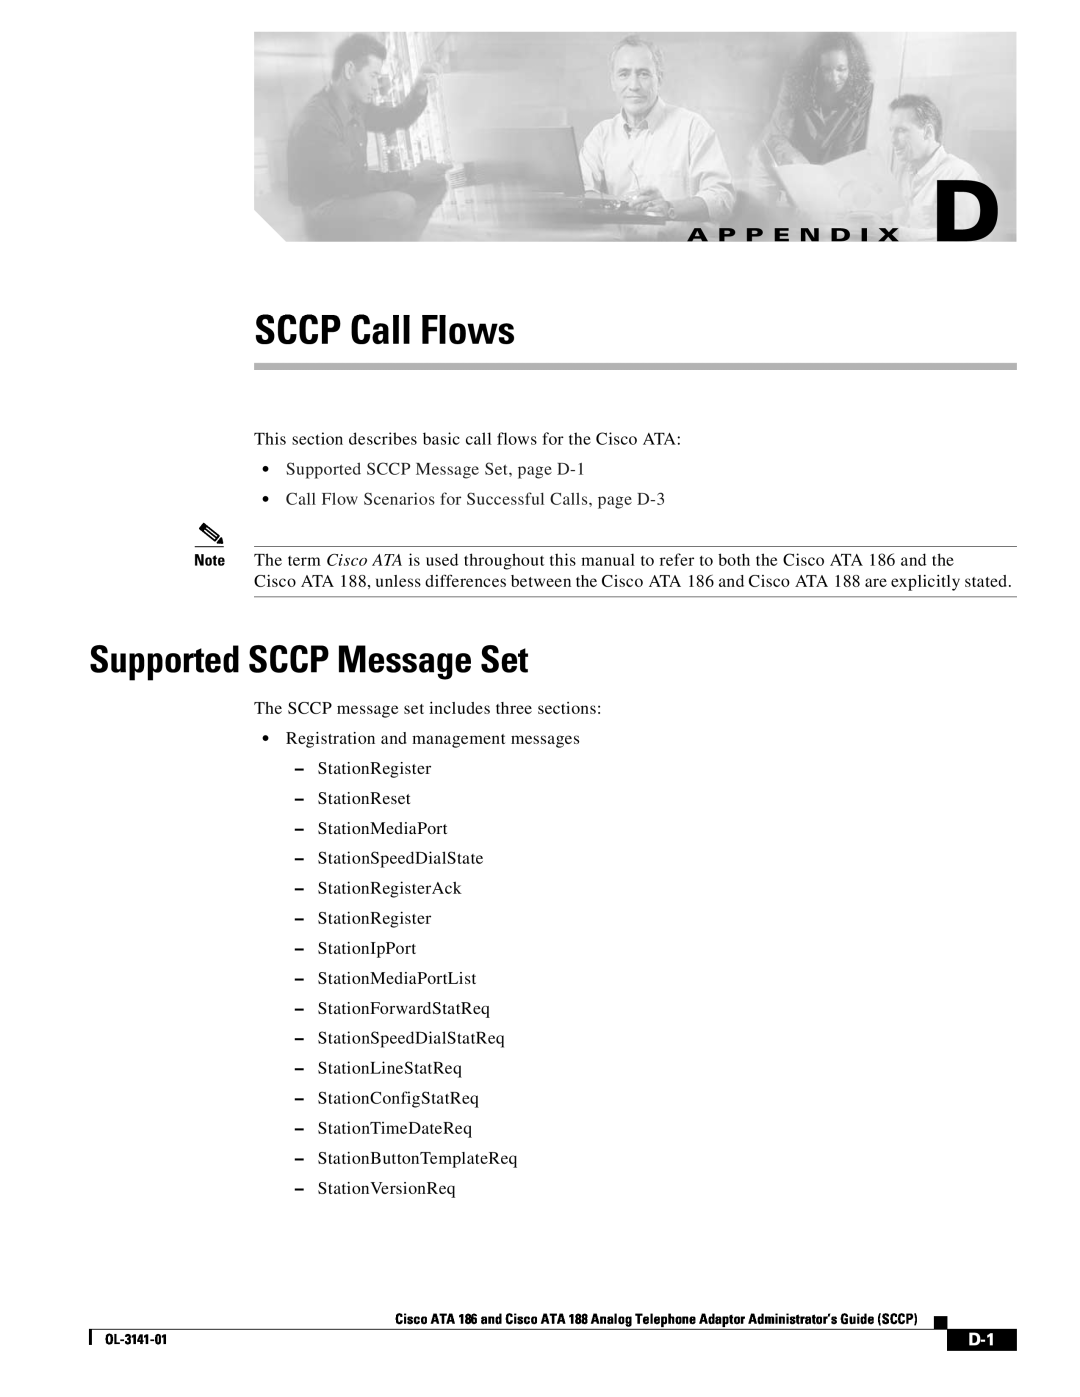 Cisco Systems ATA 188, ATA 186 manual SCCP Call Flows, A P P E N D I X D, Supported SCCP Message Set, page D-1 